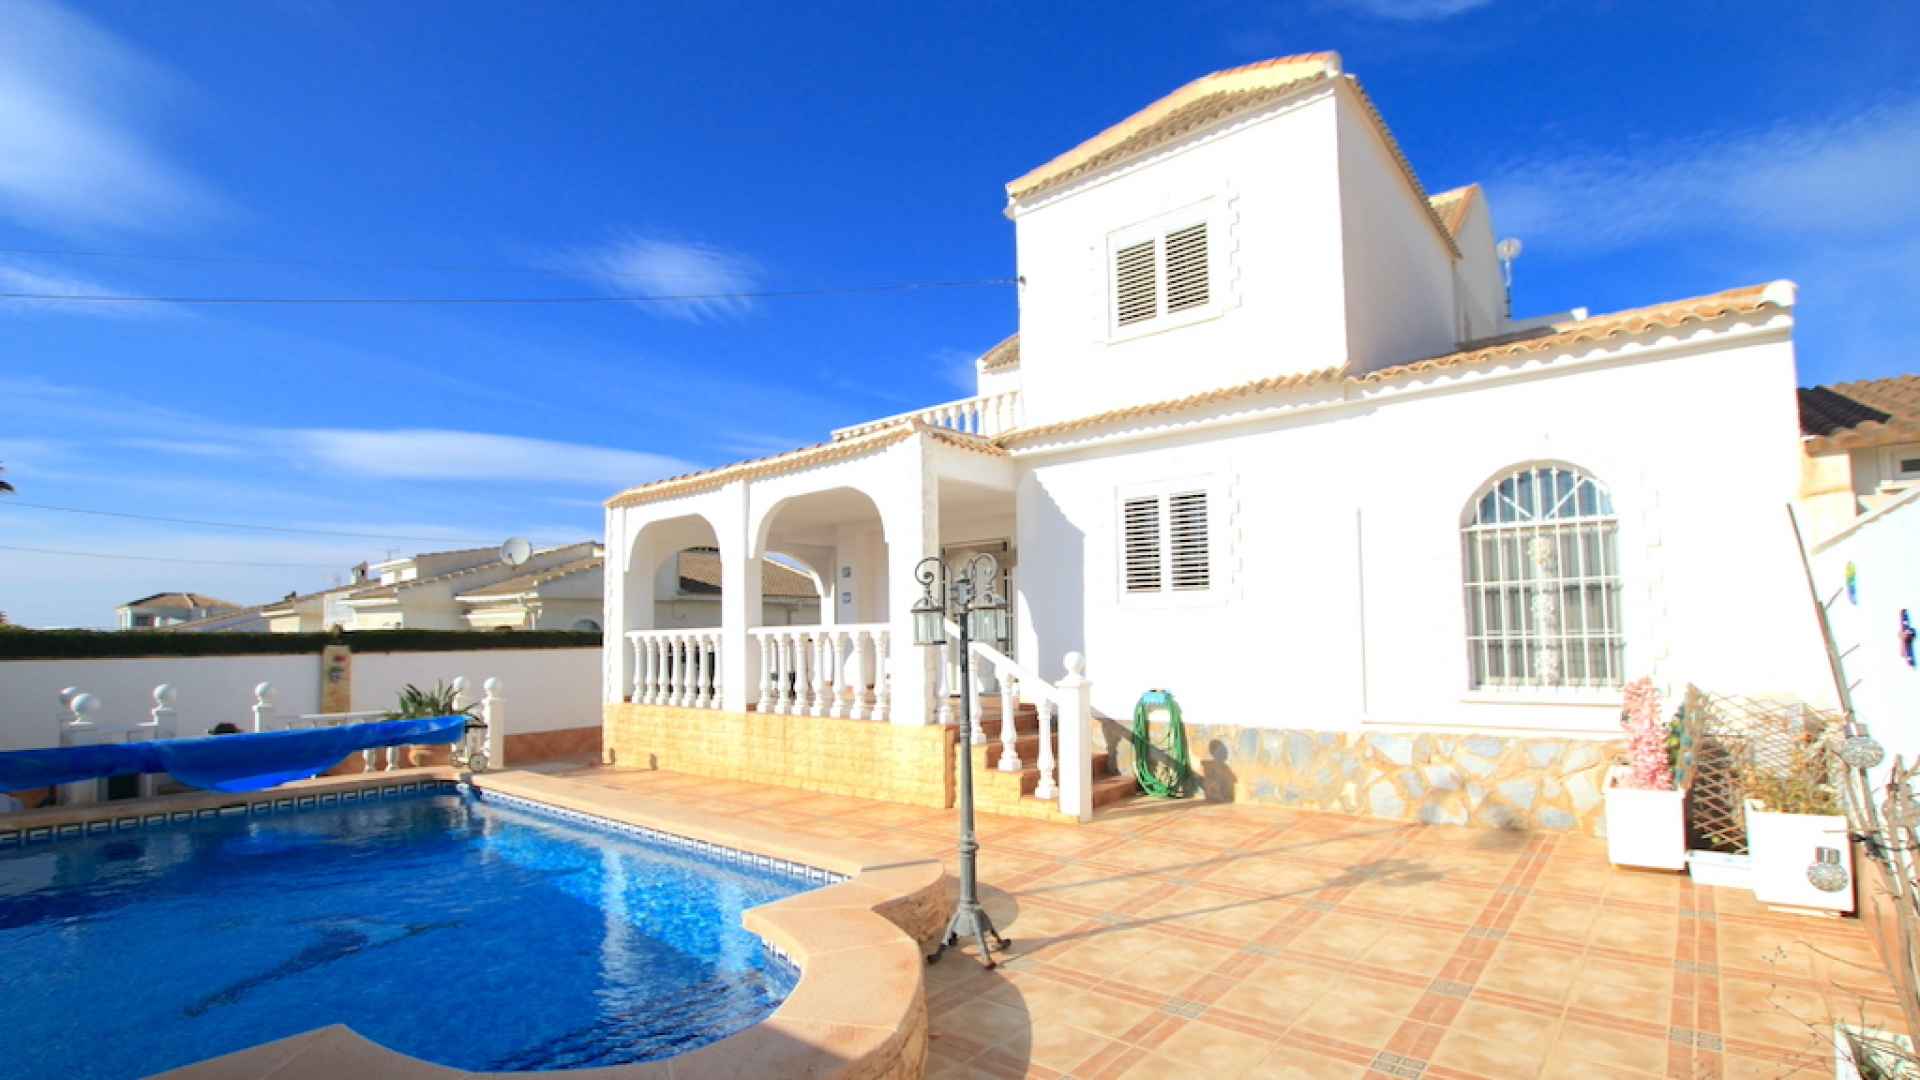 48358_expansive_4_bed_detached_villa_with_private_pool_and_garage_220224130511_img_7438